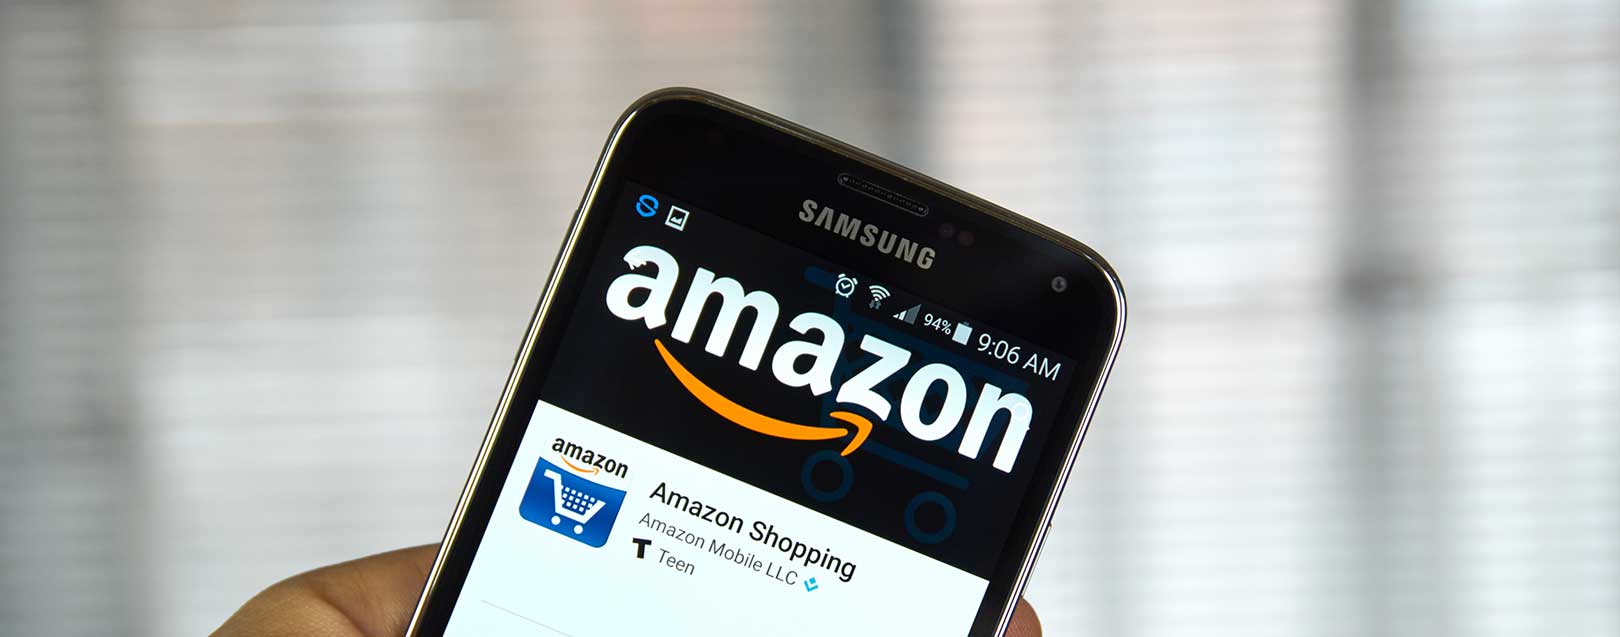 Amazon India gets approval from RBI for mobile wallet